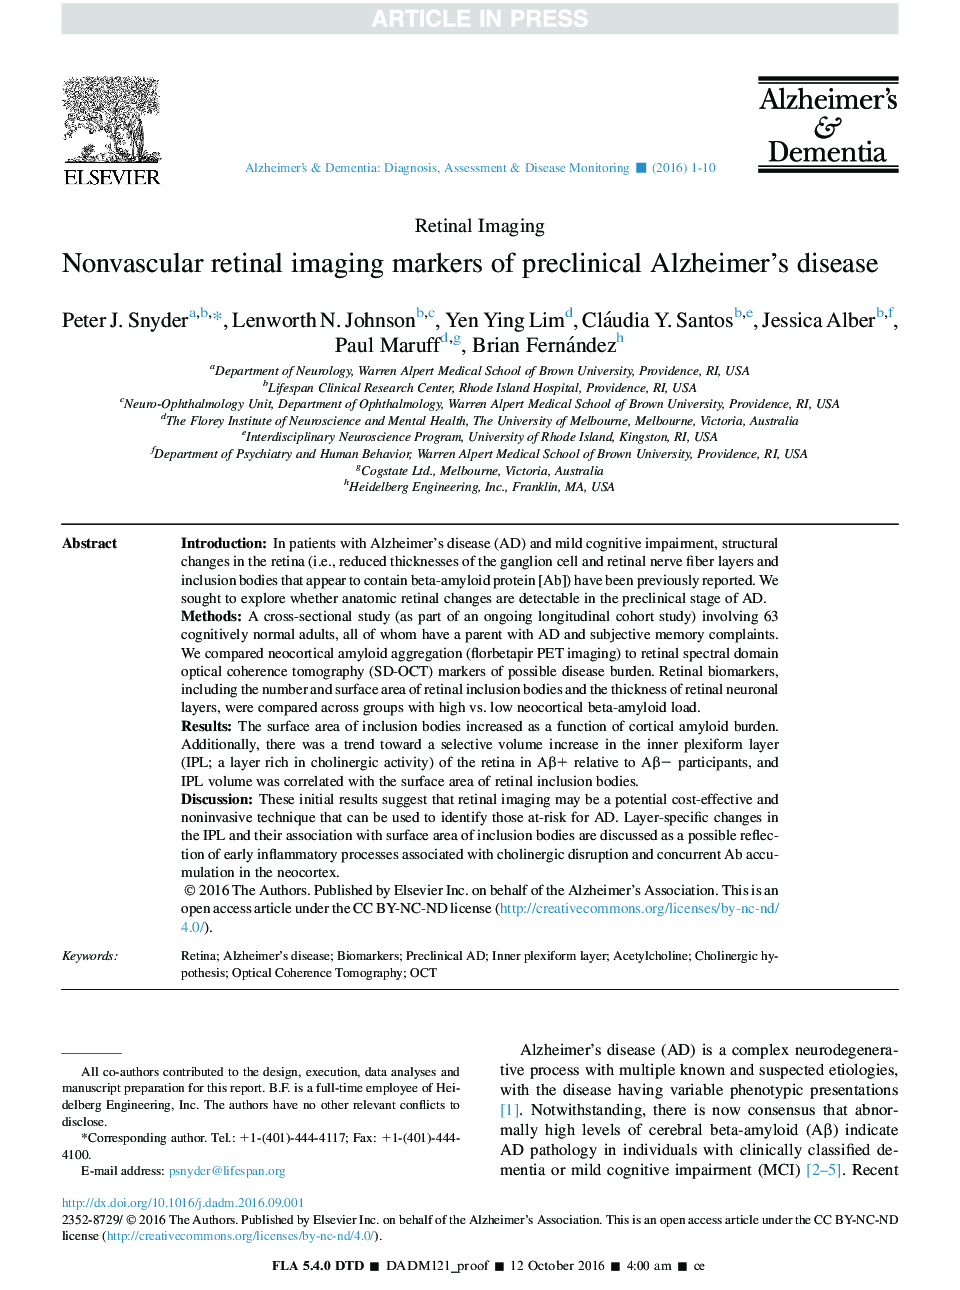 Nonvascular retinal imaging markers of preclinical Alzheimer's disease